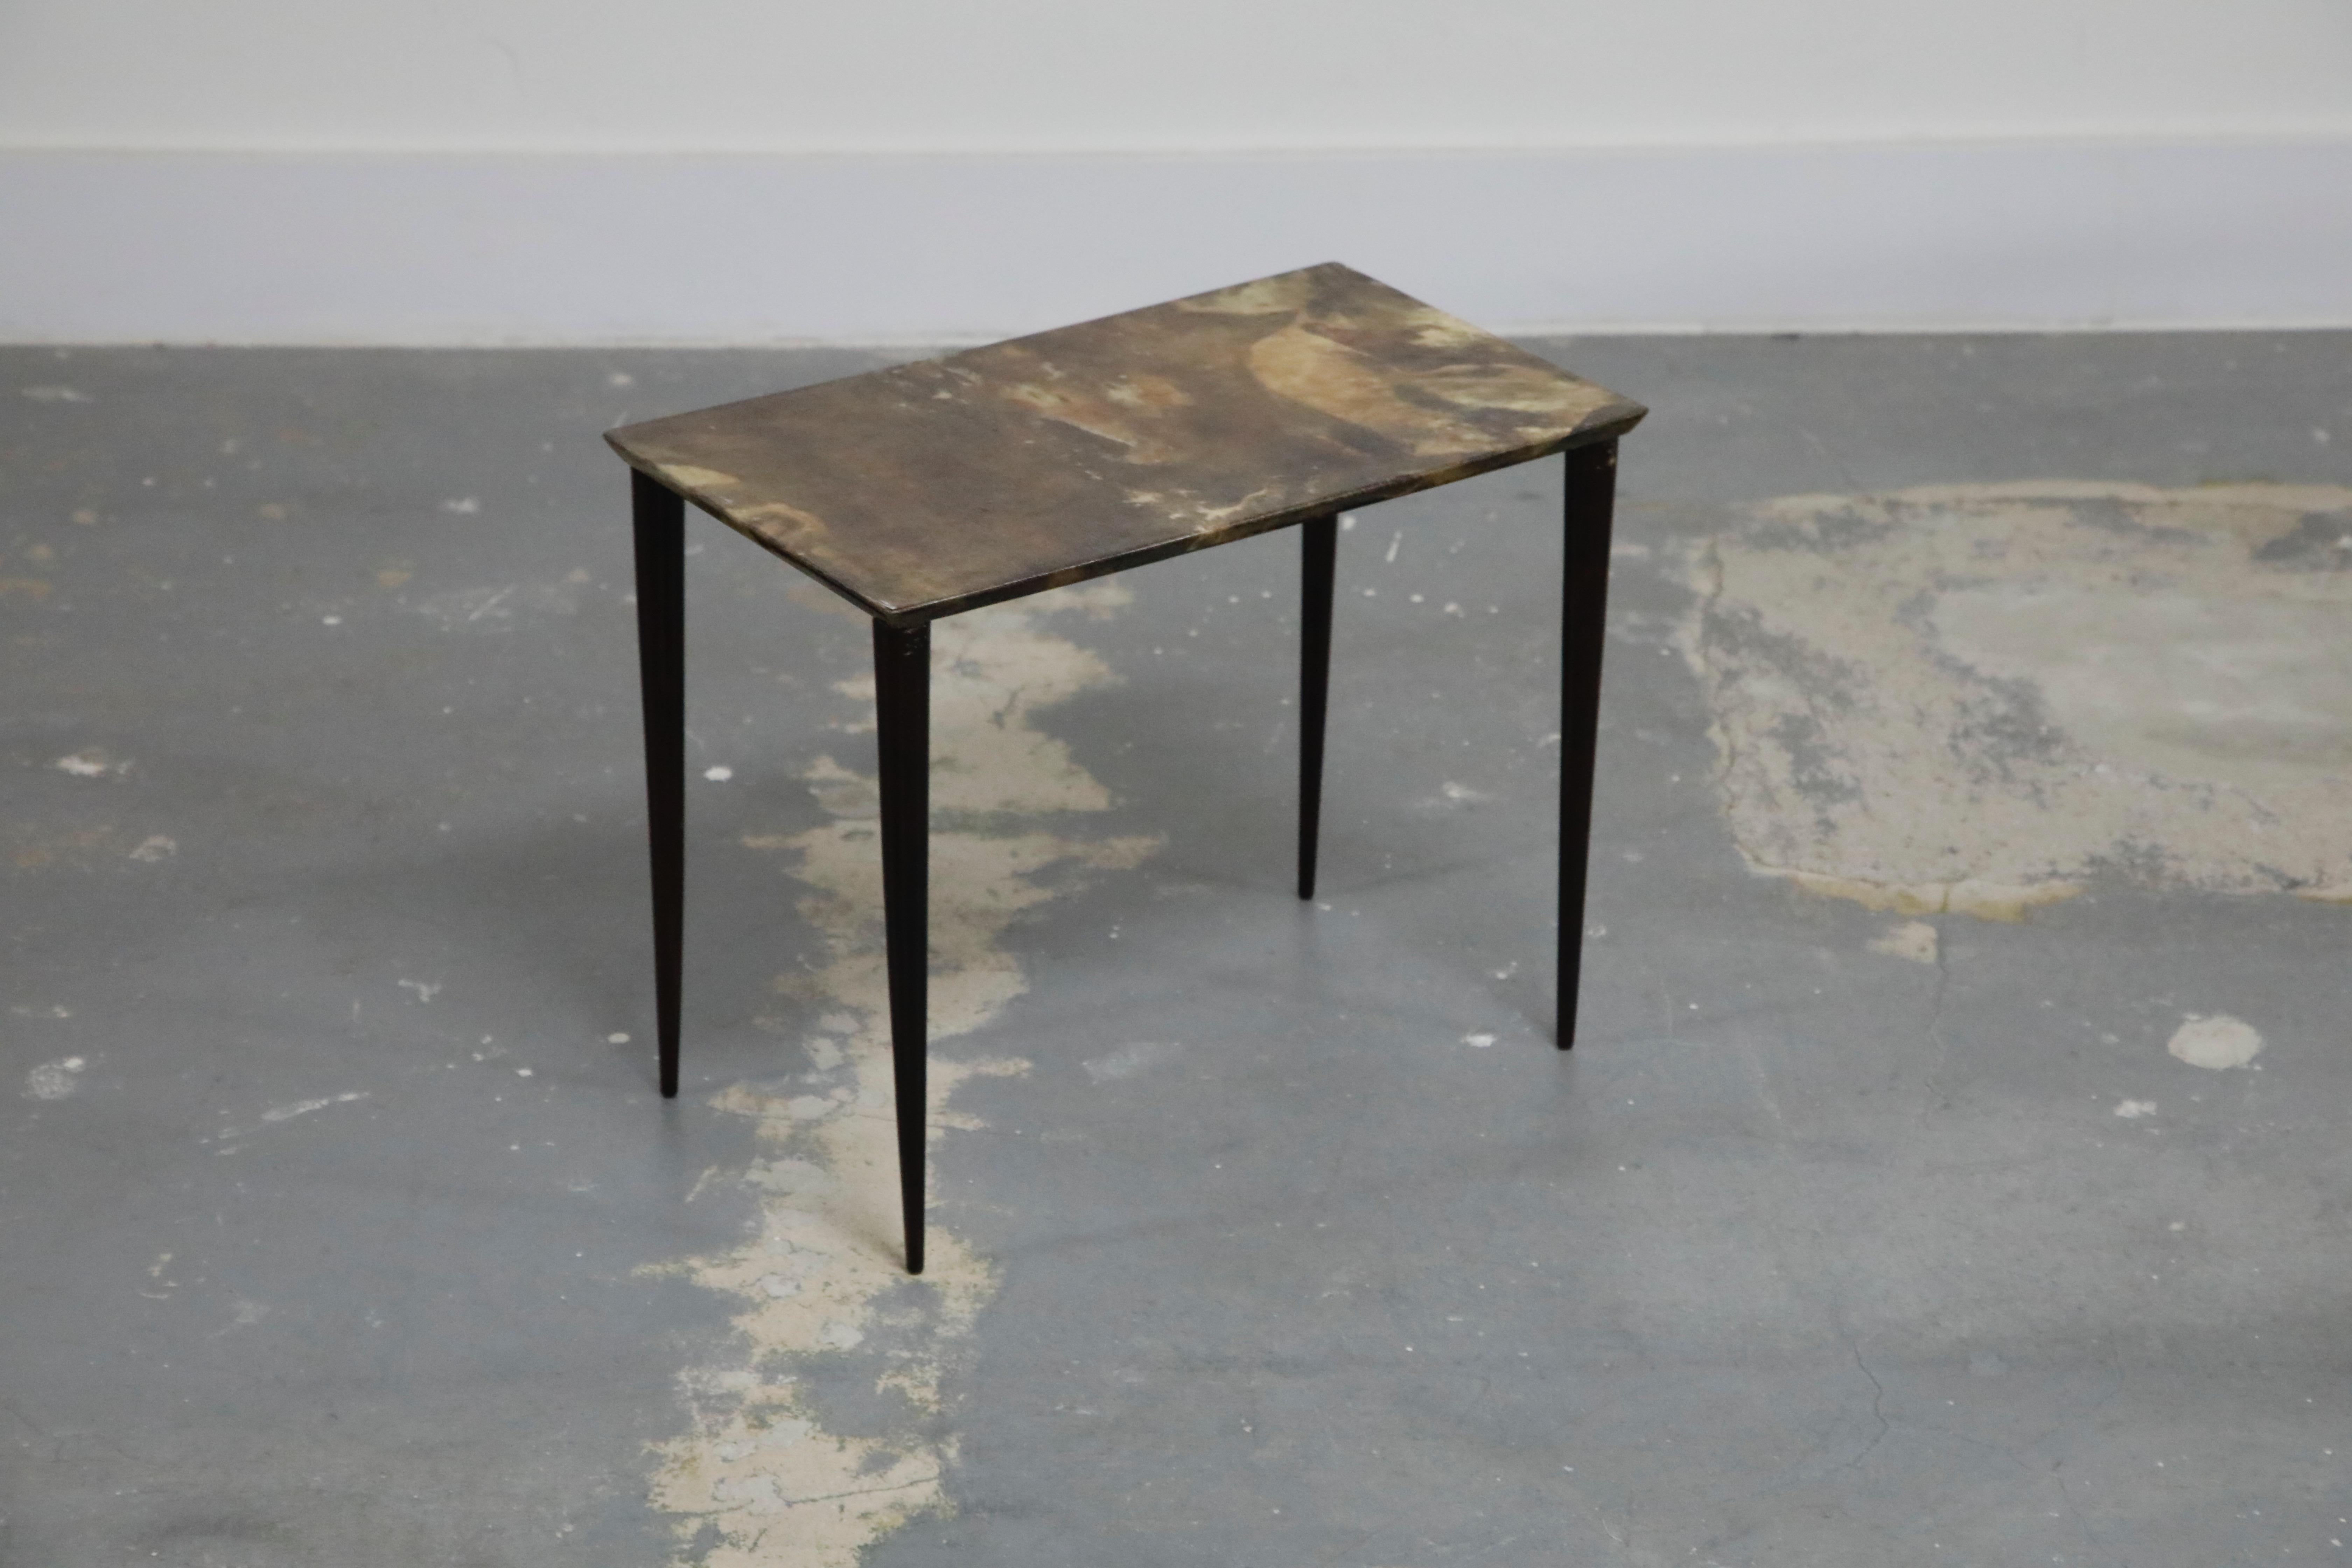 A lovely Aldo Tura lacquered goatskin side table, produced in the 1950s in Italy. This Mid-Century Modern collectors piece features thin black conical legs with a gorgeous and luxurious deep brown lacquered goatskin top. 

Perfect for the interior